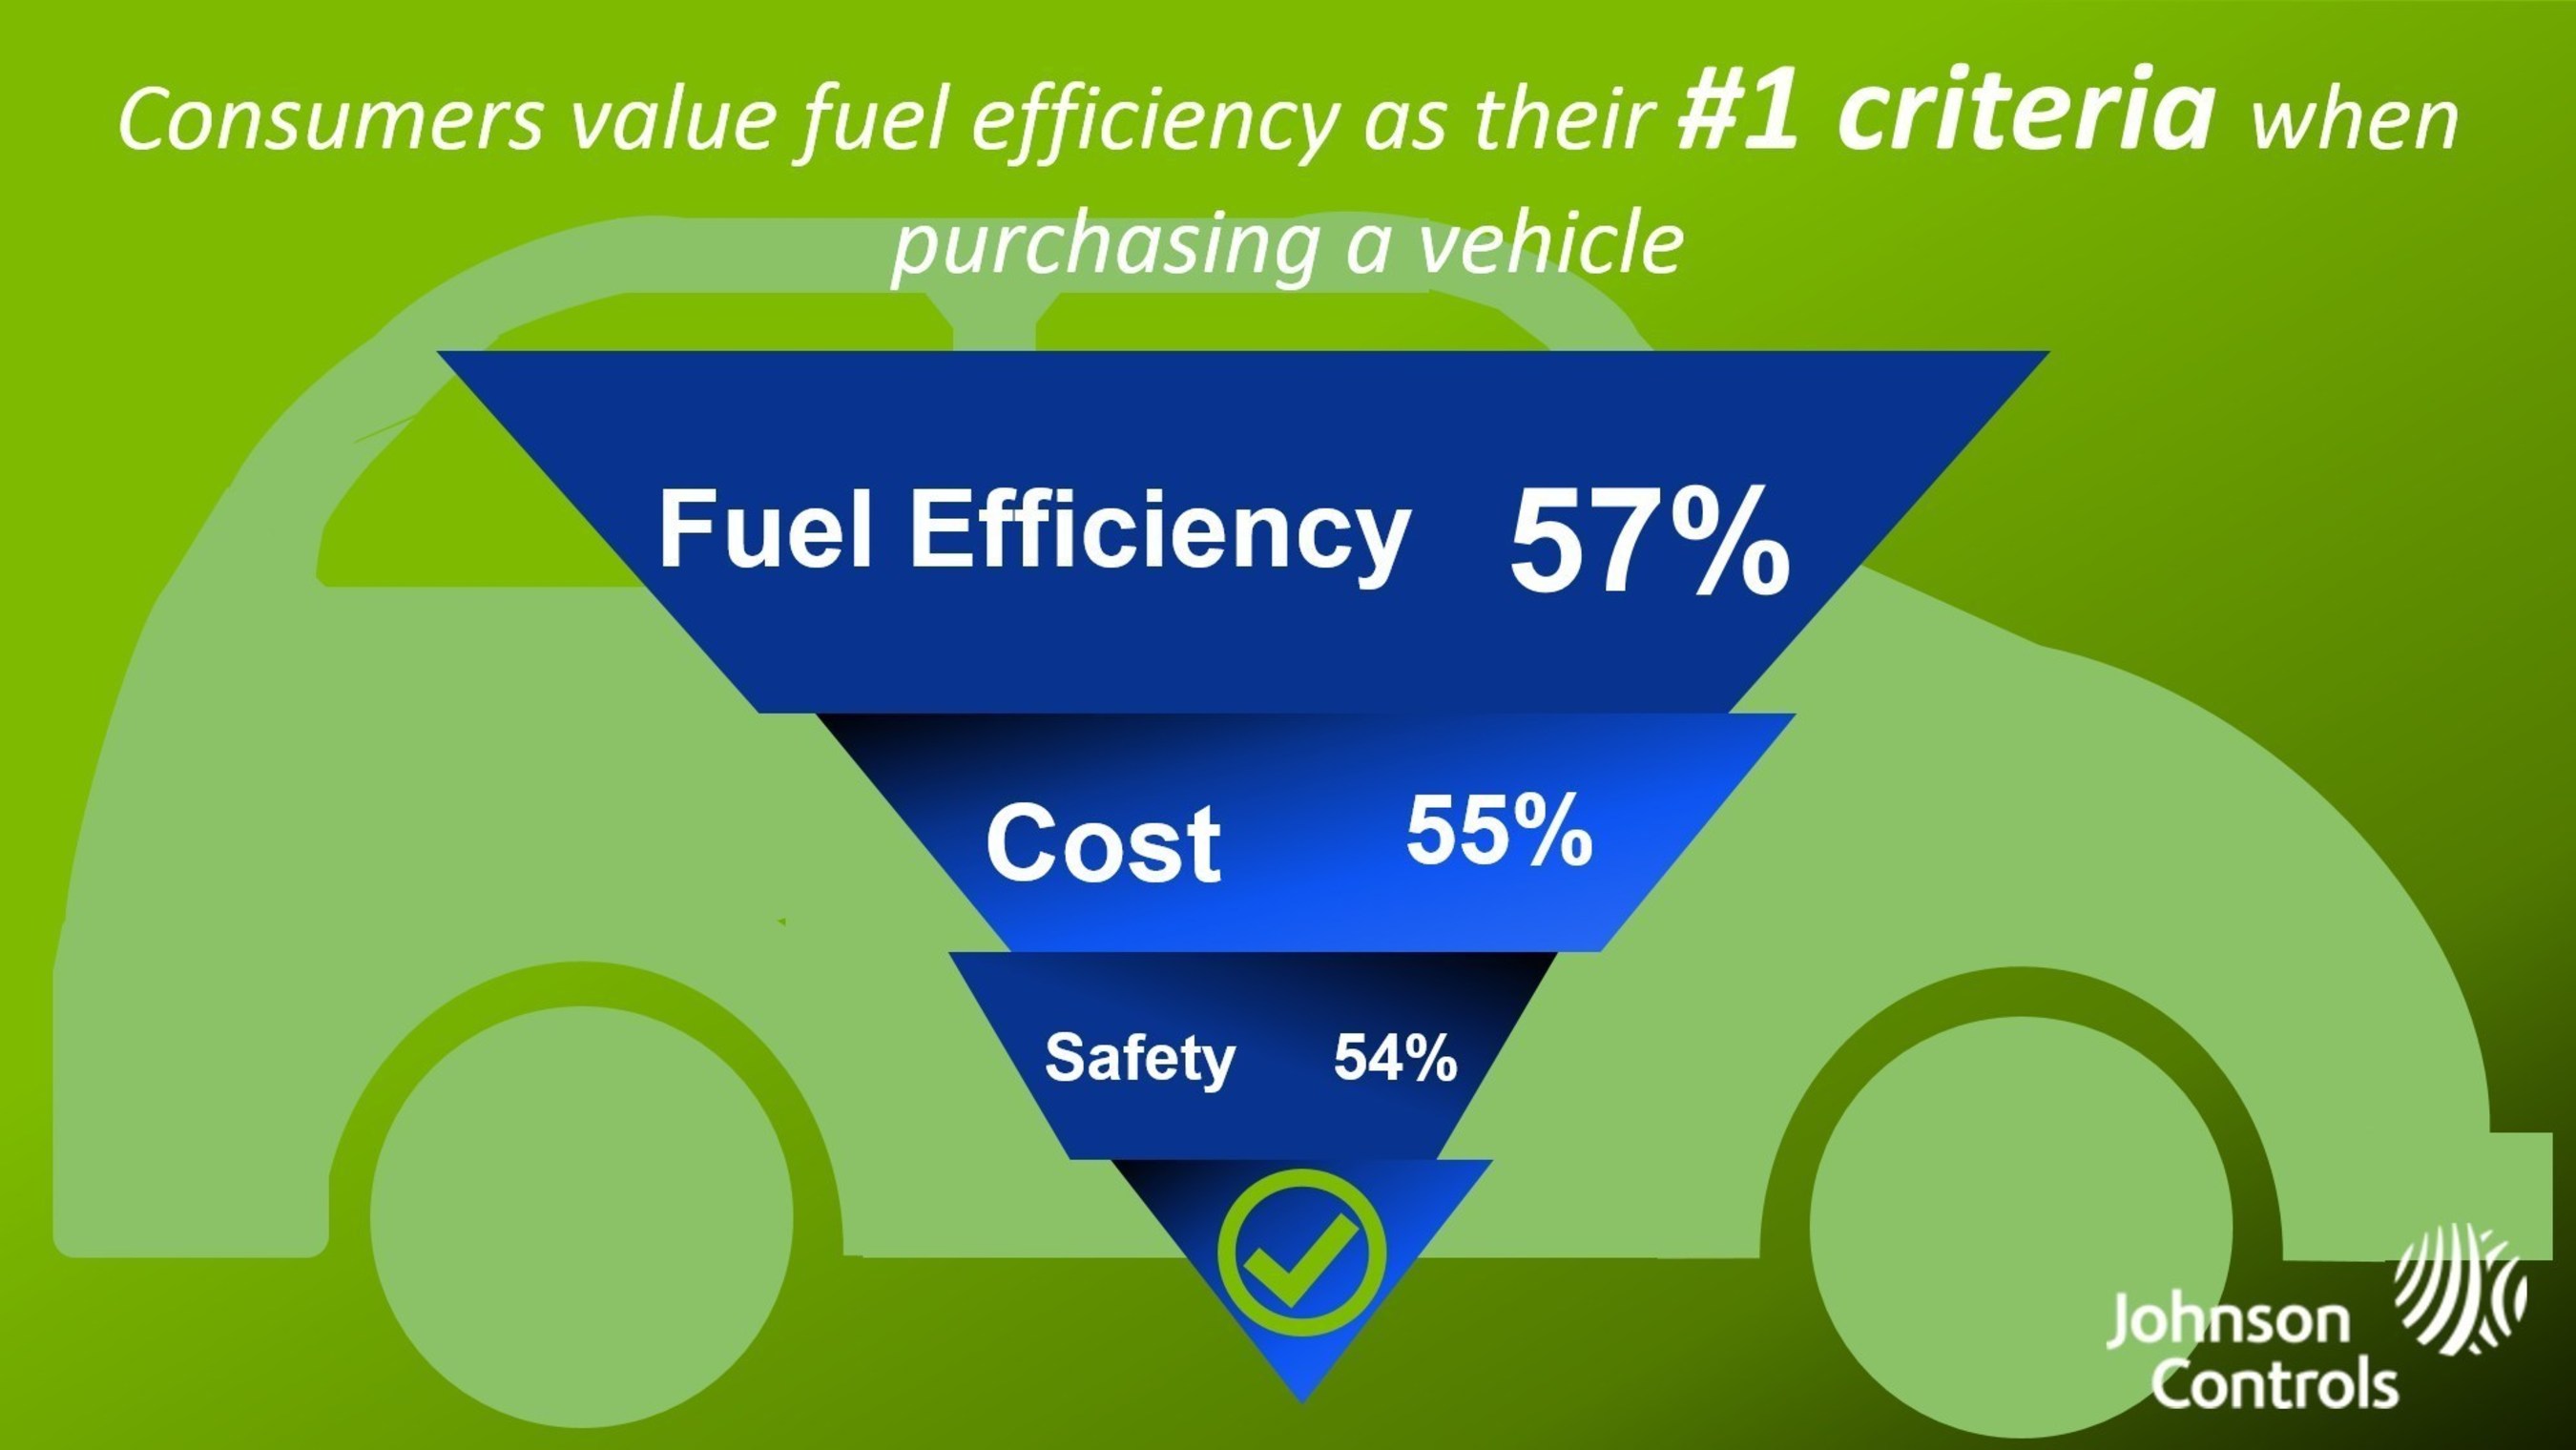 Fuel efficiency continues to be top criterion for U.S. car buyers